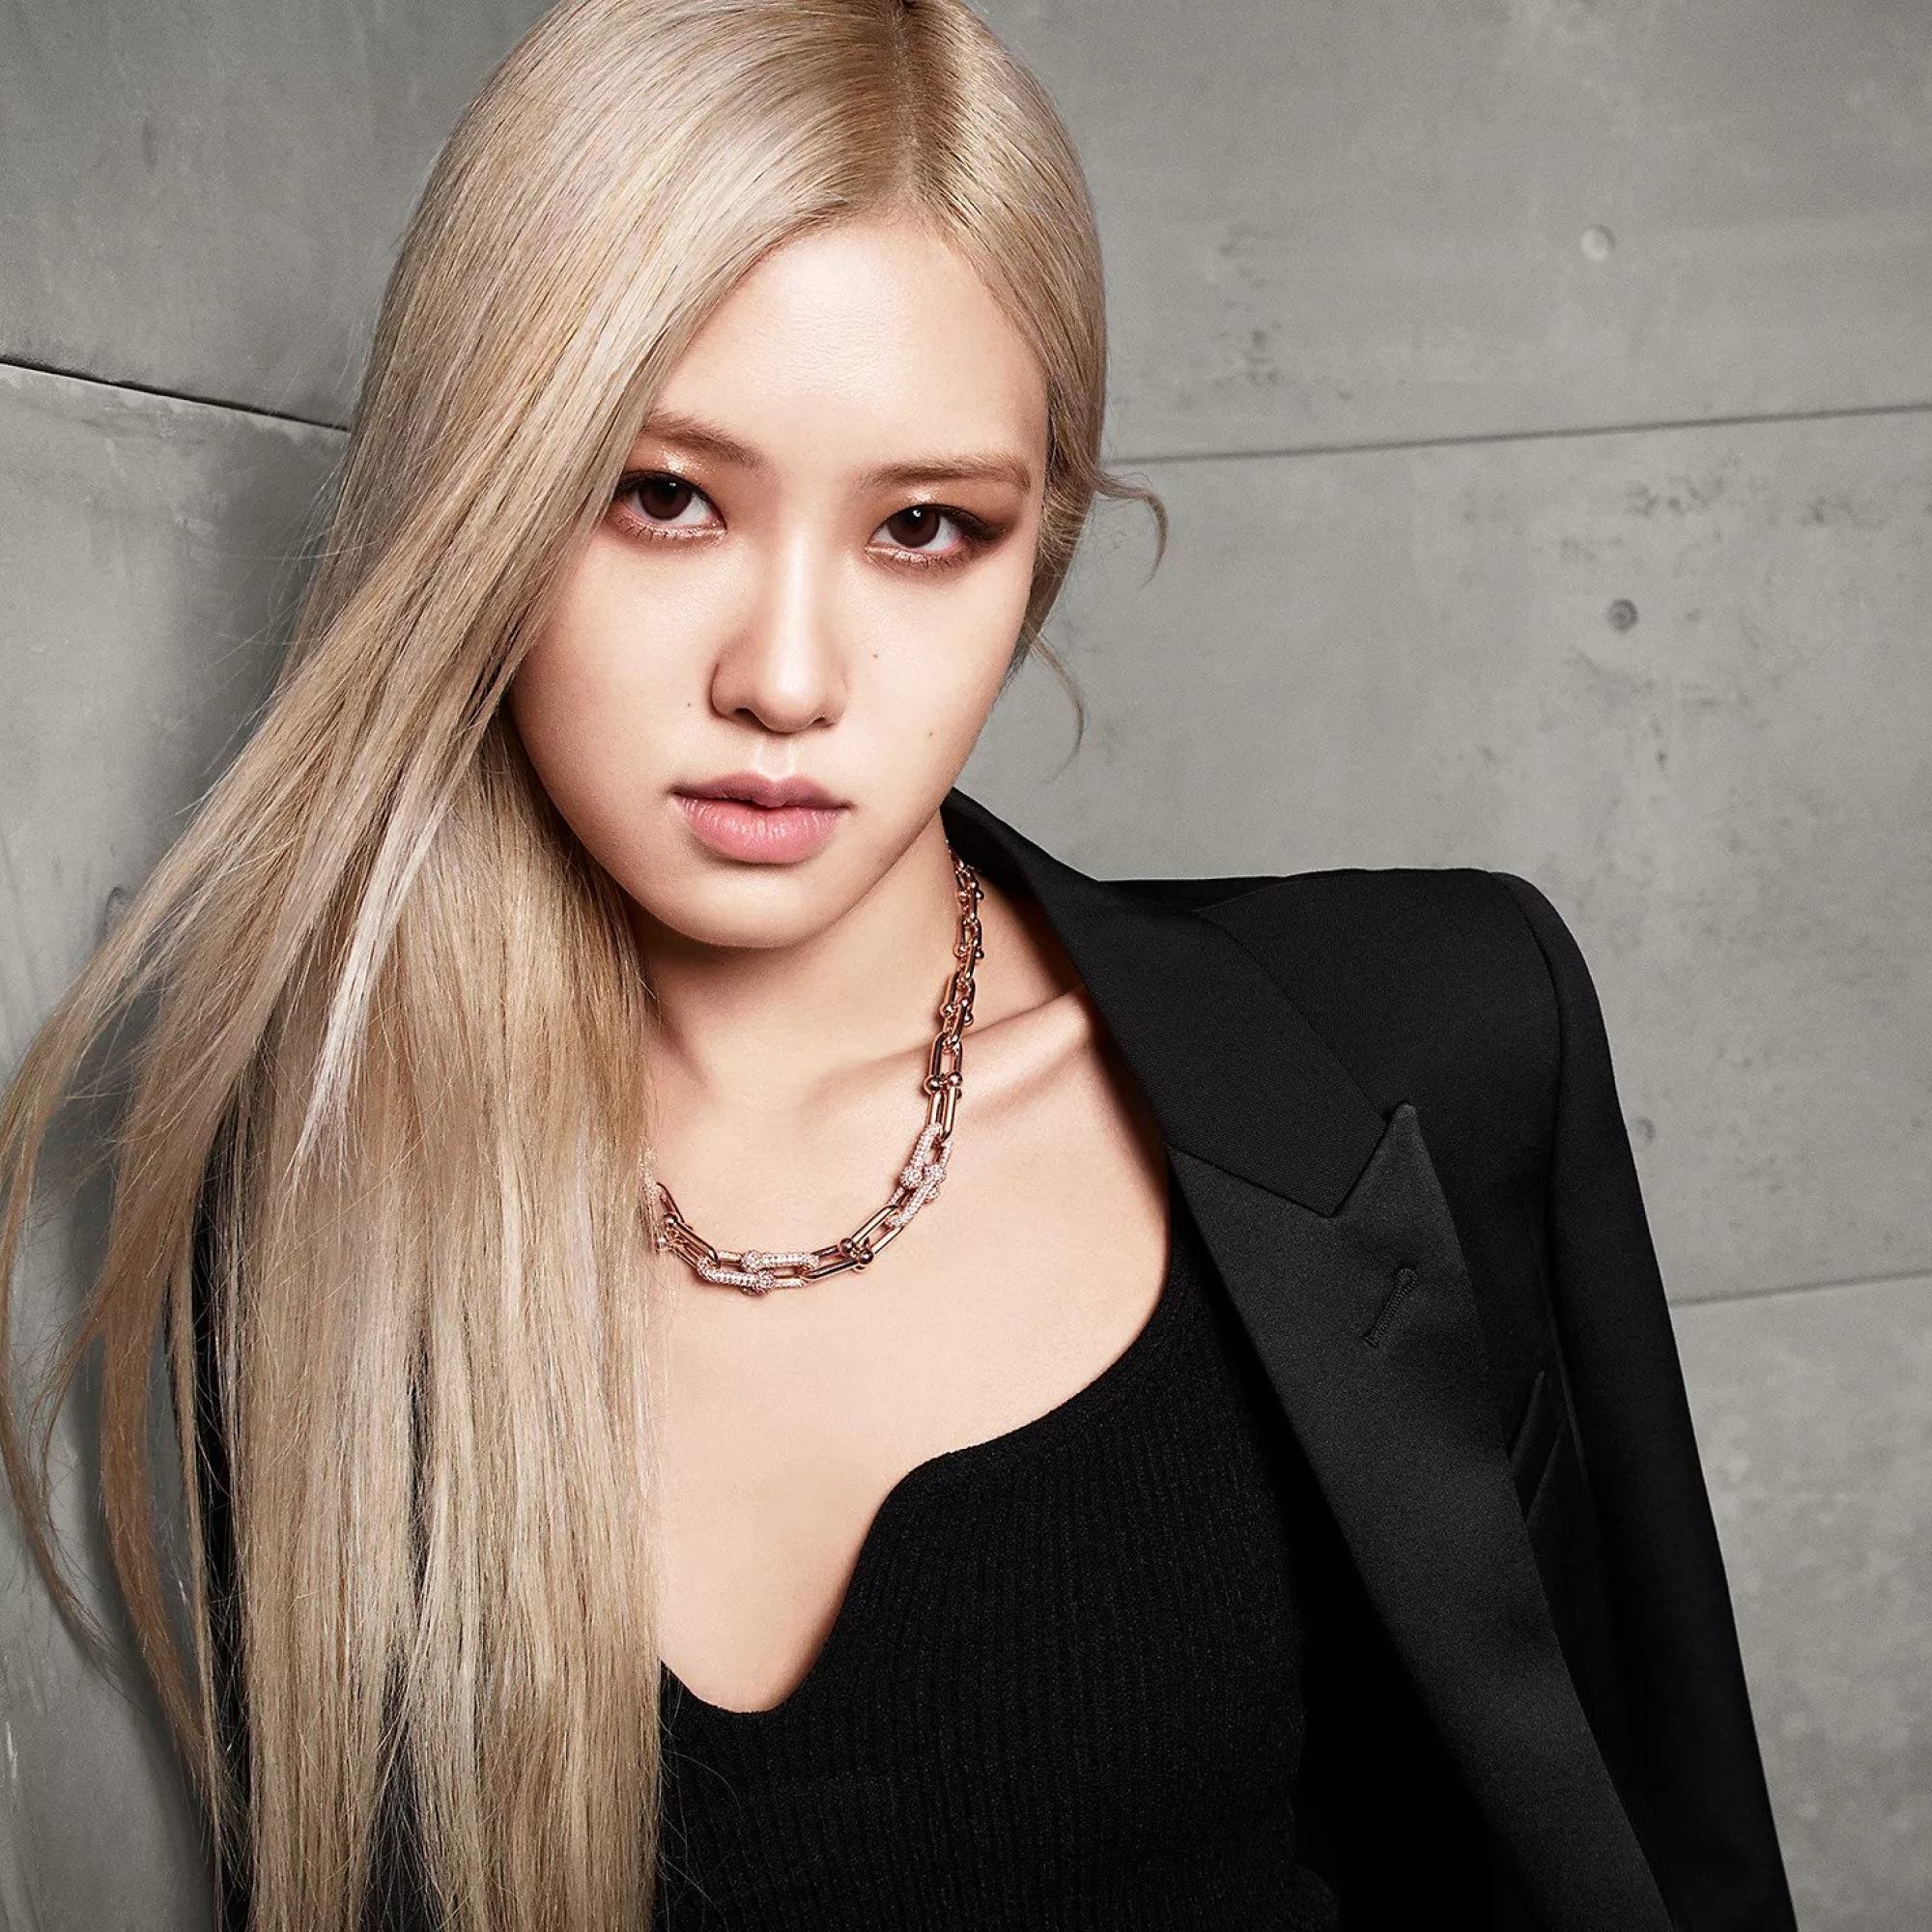 Blackpink's Rosé Is Now The Global Ambassador For This Luxury